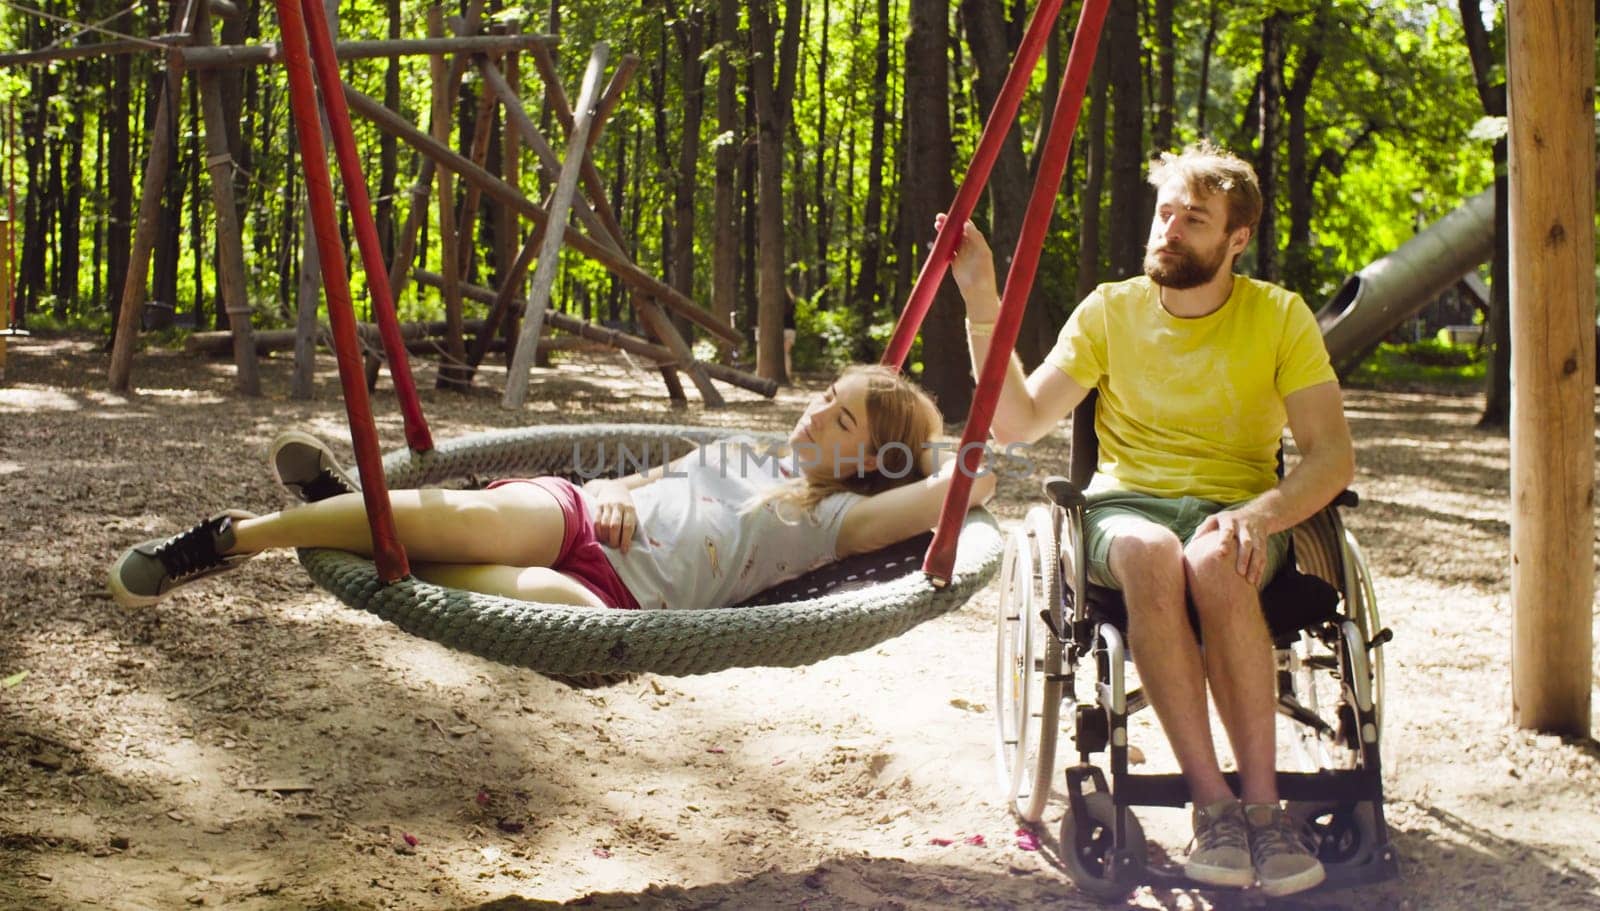 Happy young disable man in a wheelchair in the park with his wife. Woman is lying on a swing and a man is pushing a swing